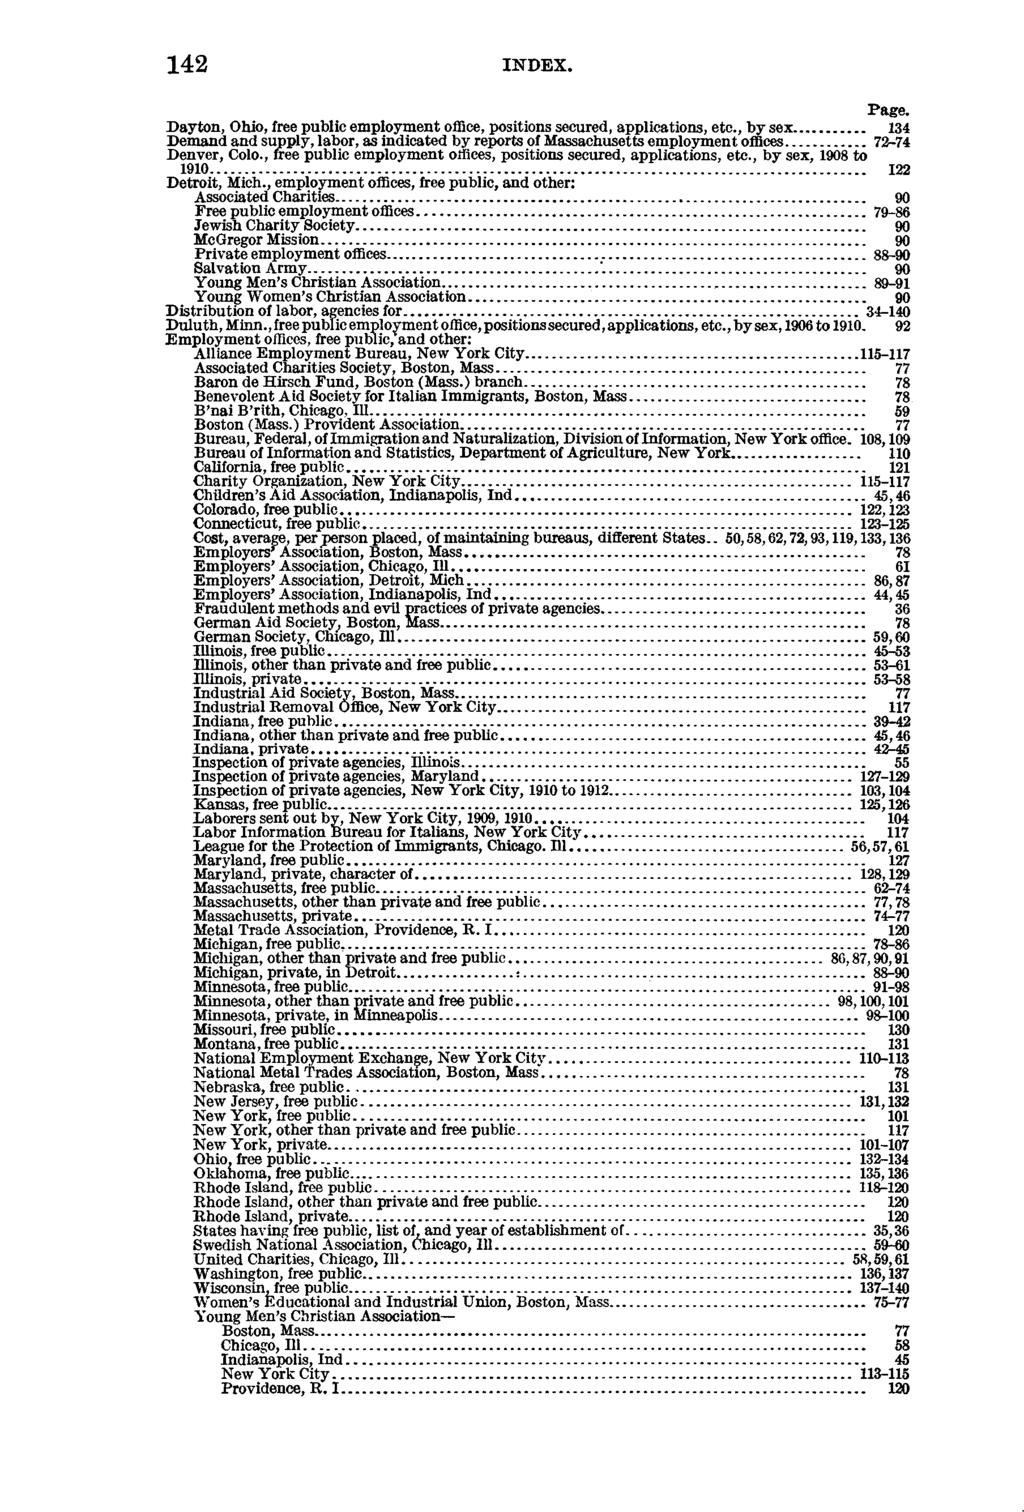 142 INDEX. Page. Dayton, Ohio, free public employment office, positions secured, applications, etc., by sex... 134 Demand and supply, labor, as indicated by reports of Massachusetts employment offices.